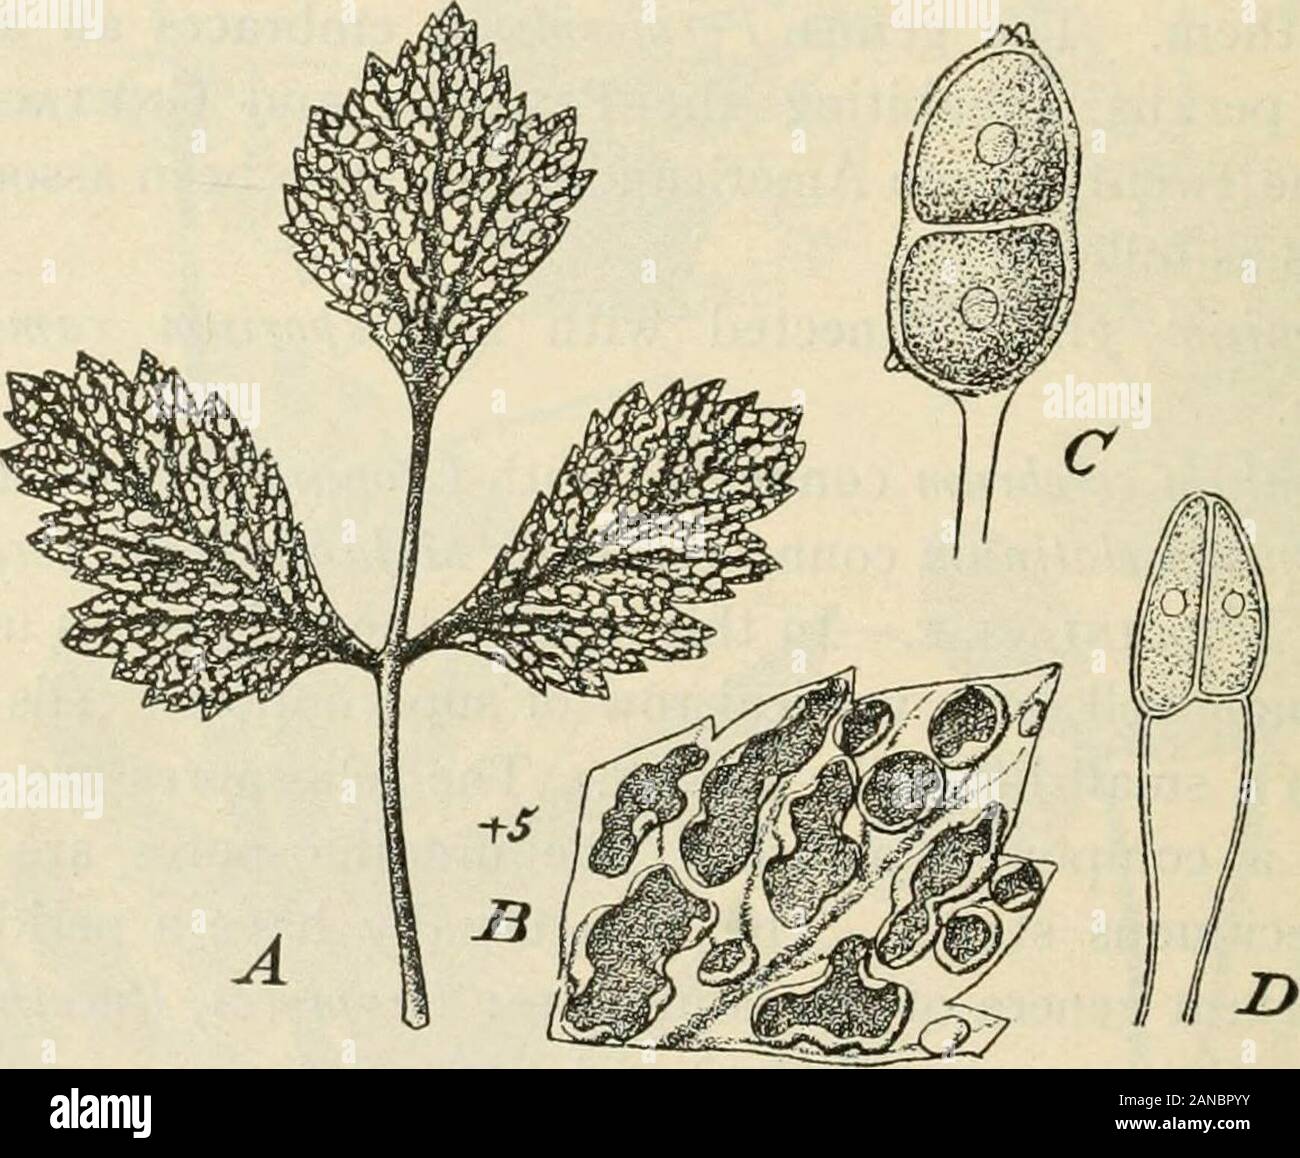 A text-book of mycology and plant pathology . may occur in some species. The principal cereal orgrain rusts may be enumerated first, as they are fairly well known,owing to the researches of Eriksson and others: Black Rust of Cereals, Puccinia graminis (Fig. 64) with its aeciumon the barberry, Berbcris vulgaris. Six forms of this species may bedistinguished: (i) f. sp. Iriiici on wheat (seldom on rye, barleyand oats); (2) f. sp. secalis on rye, barley and couch grass, Agropyron 202 MYCOLOGY repens, Elymus arenarius, Bromus secalinus and others; (3) f. sp.avencB on oats and Avena elatior, Dactyl Stock Photo